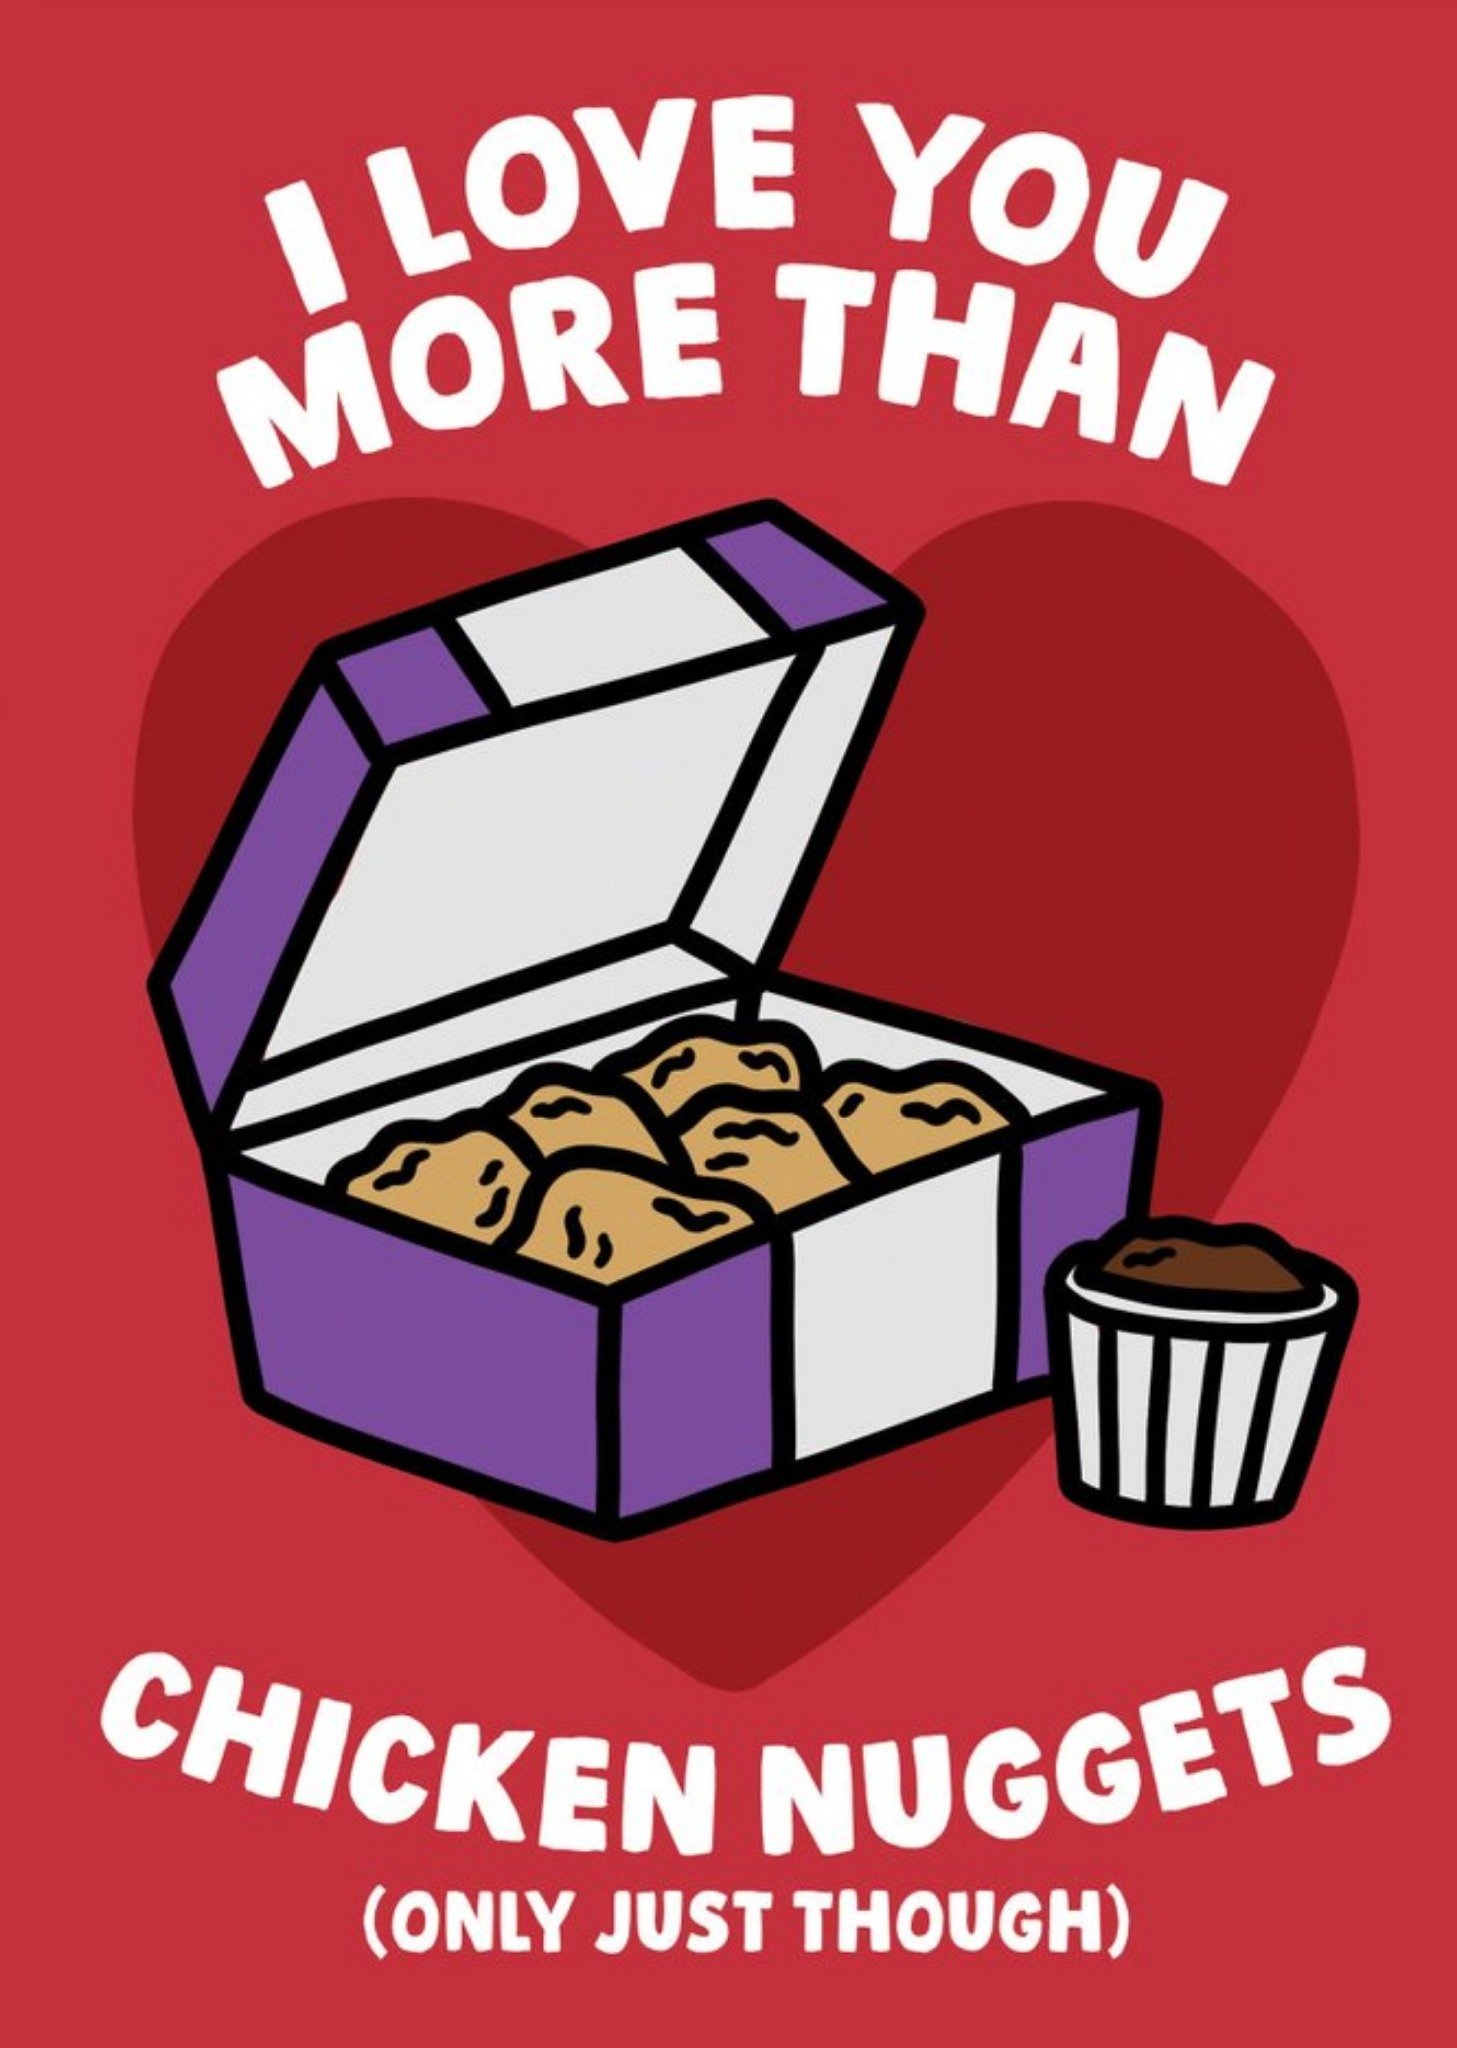 Moonpig Funny I Love You More Than Chicken Nuggets Valentine's Day Card, Large